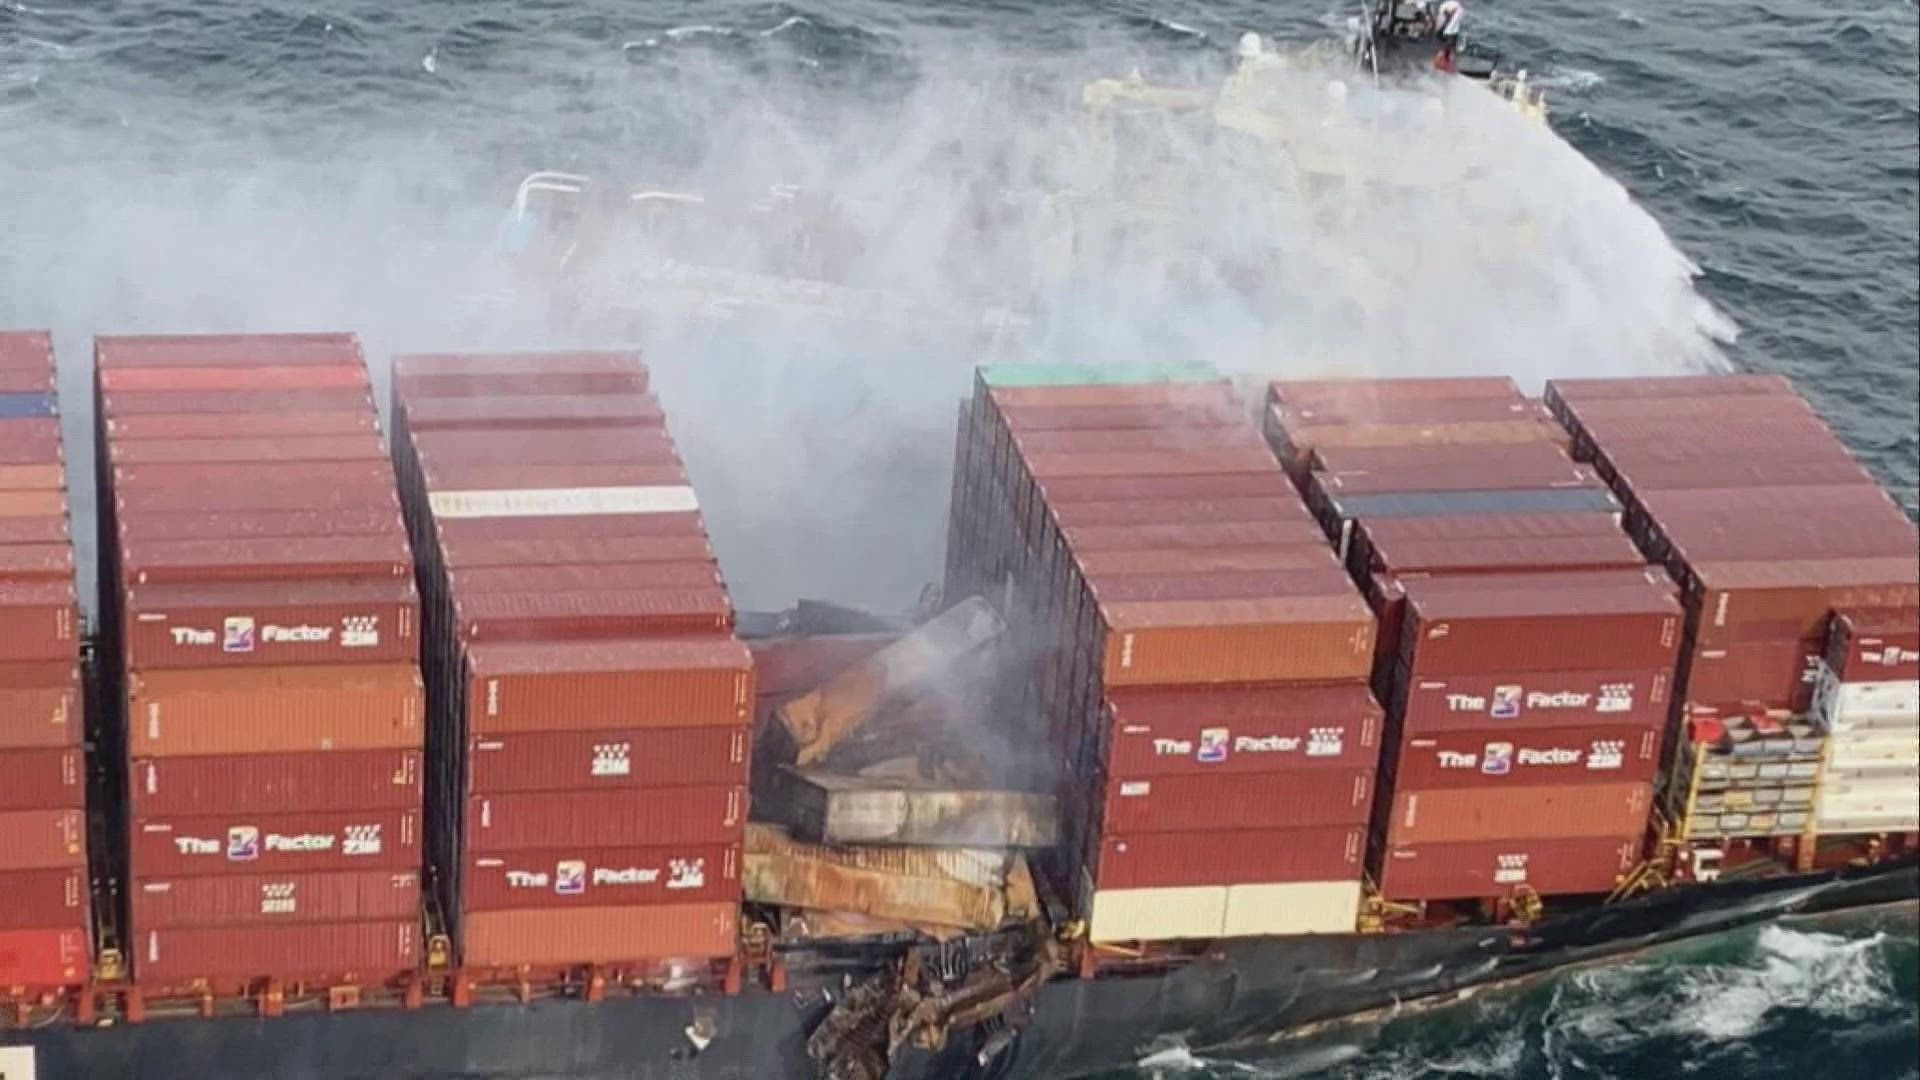 The ship, which lost containers in the Strait of Juan de Fuca, is now believed to have lost 100 containers, as opposed to 40.